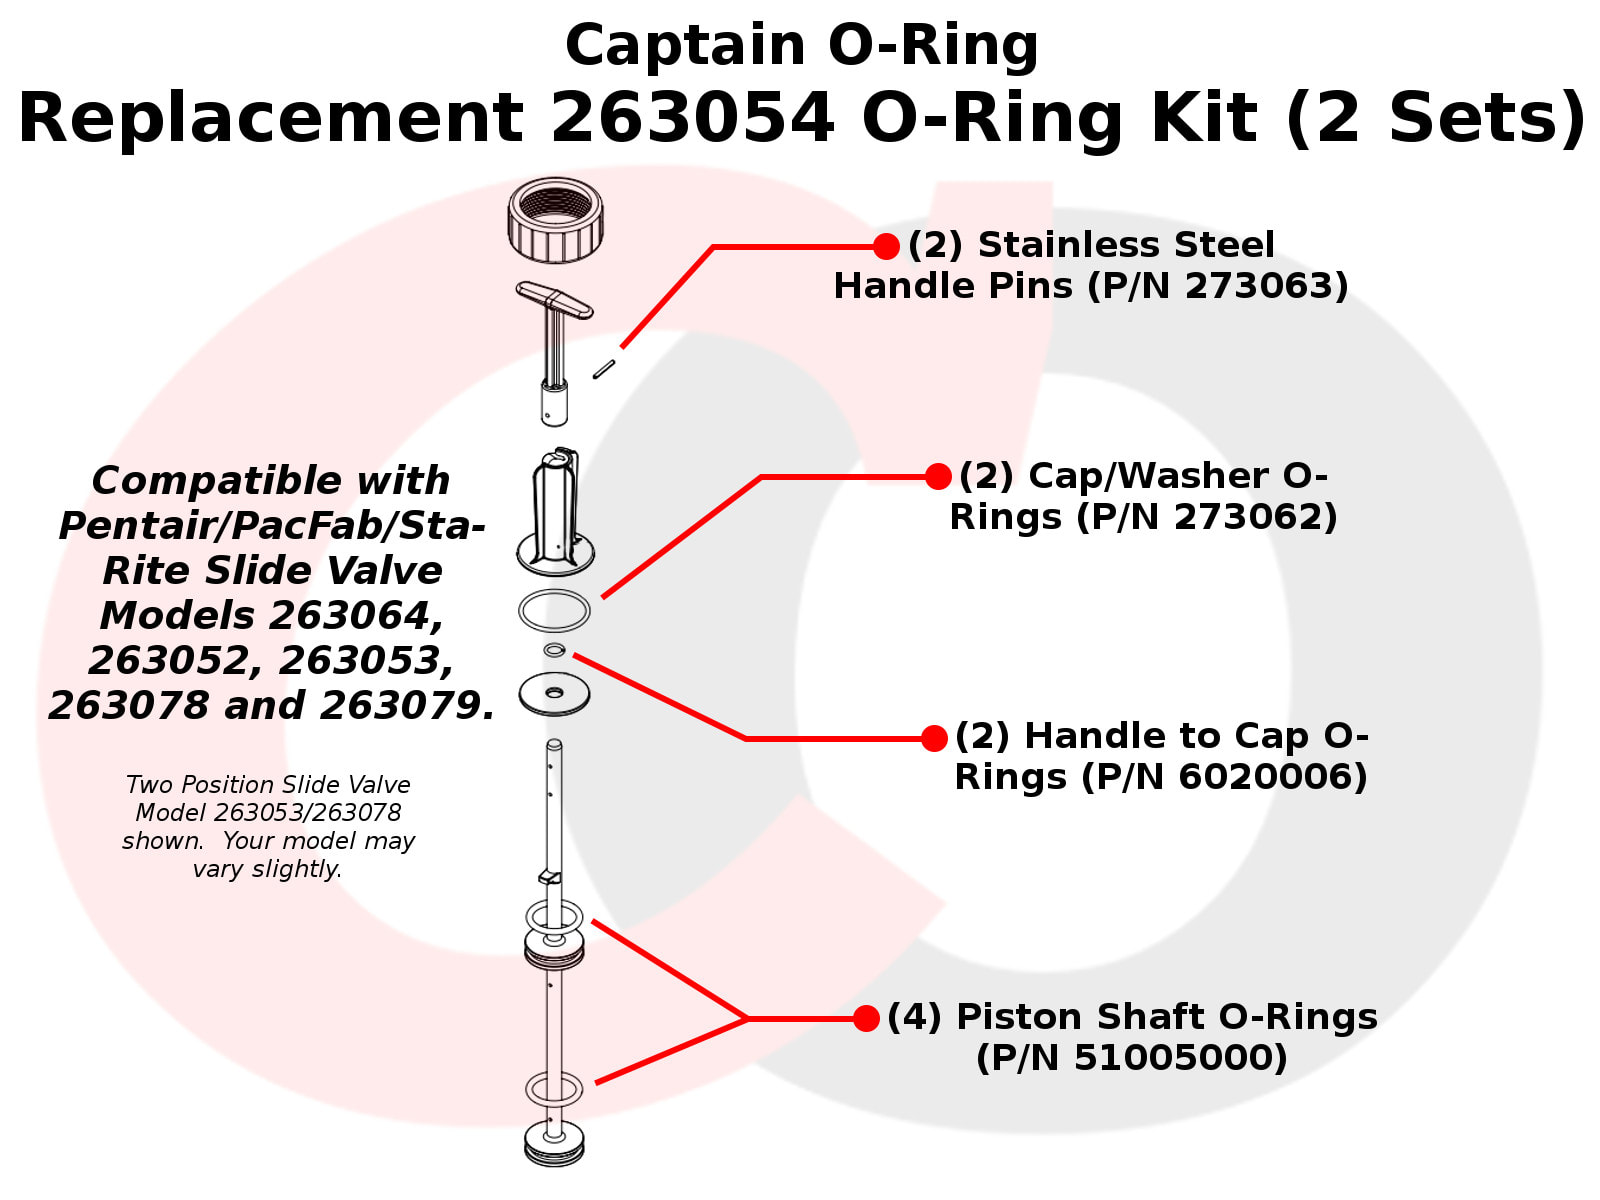 Captain O-Ring - Replacement 263054 O-Ring Kit for Pentair/PacFab